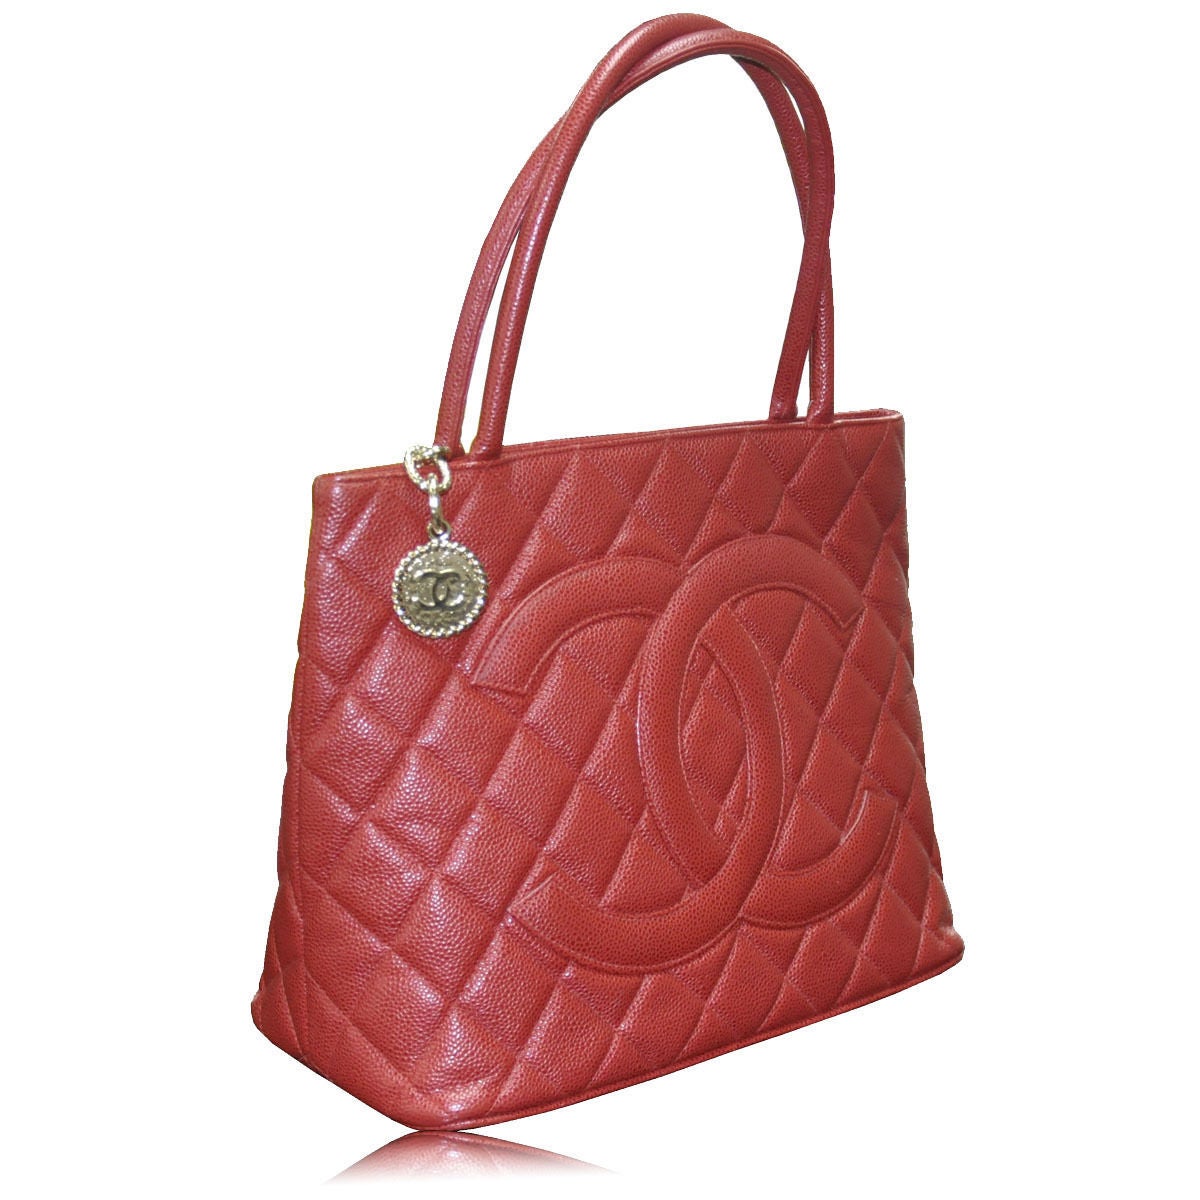 Company - Chanel
Model - Medallion
Material - Red Caviar 
Lining - Red leather
Measurements - 12